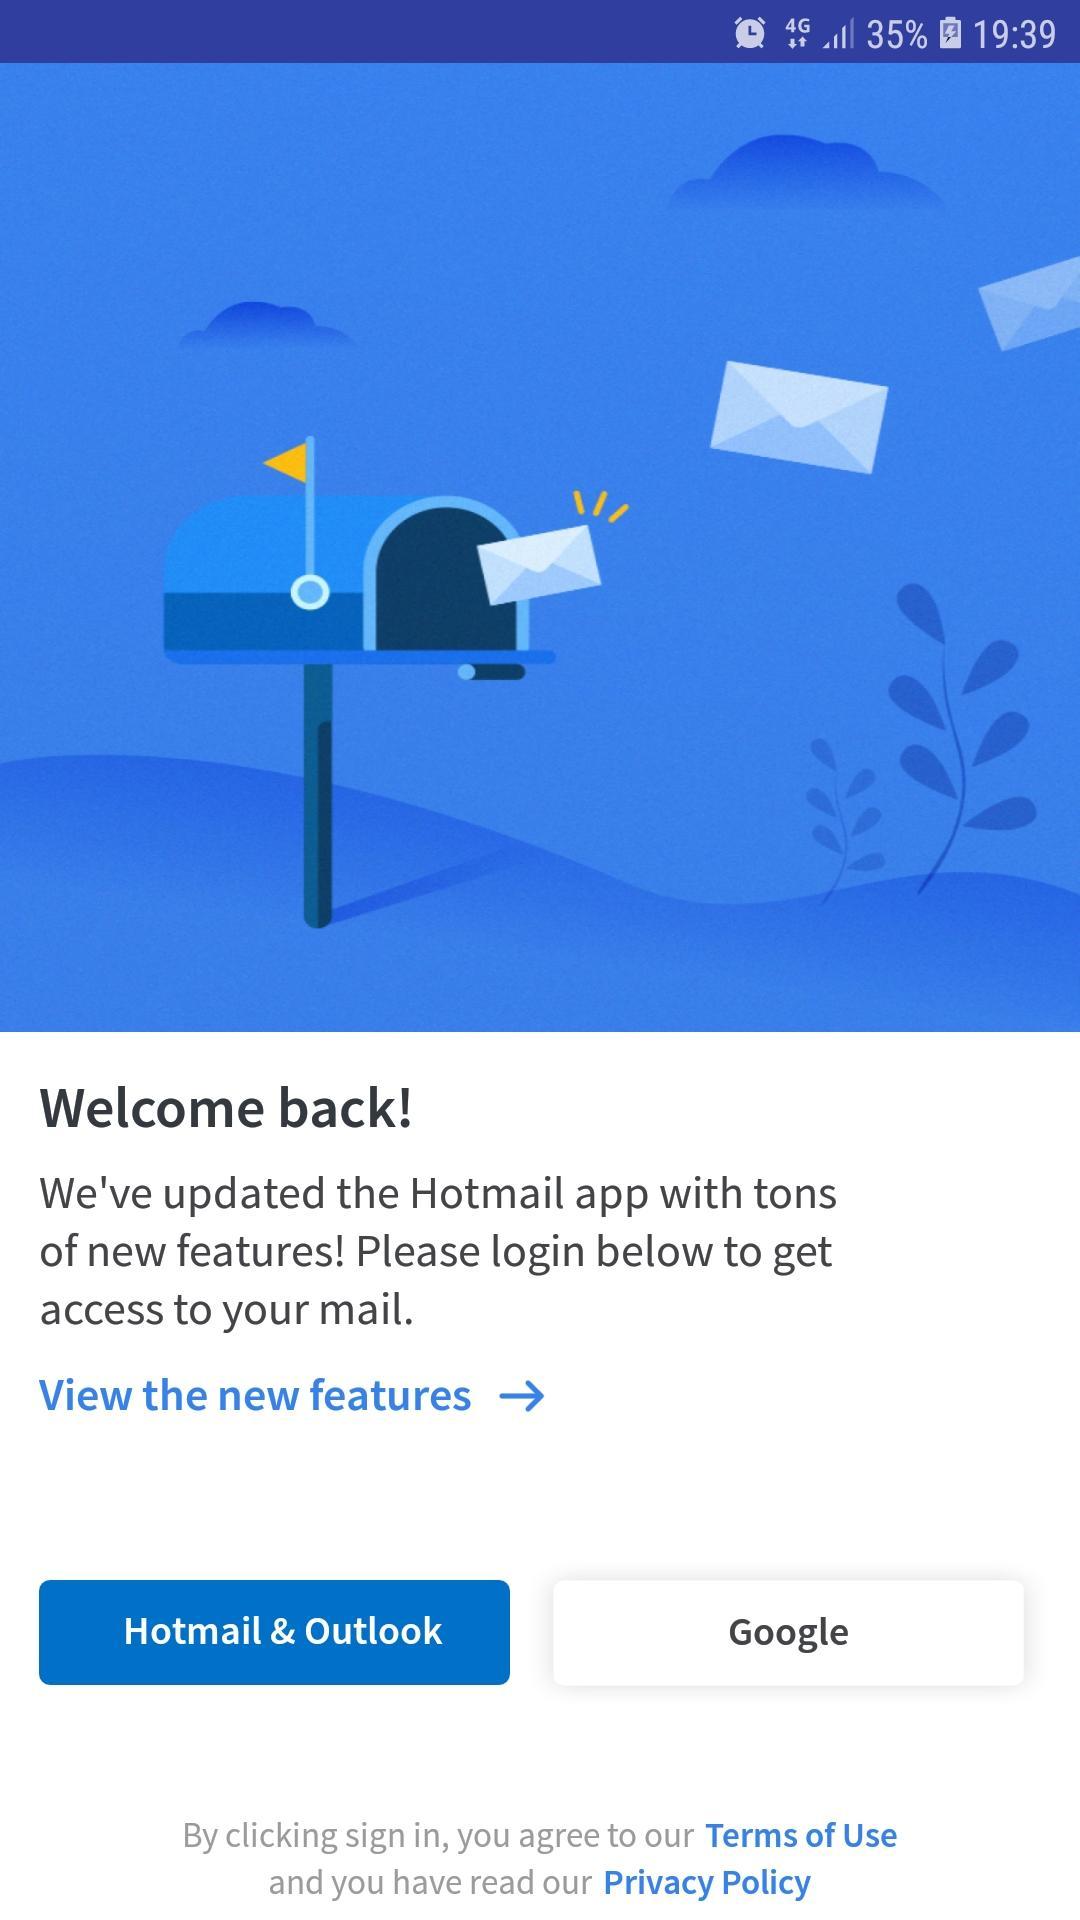 Connect for Hotmail amp; Outlook: Mail and Calendar 5.3.63 Screenshot 1